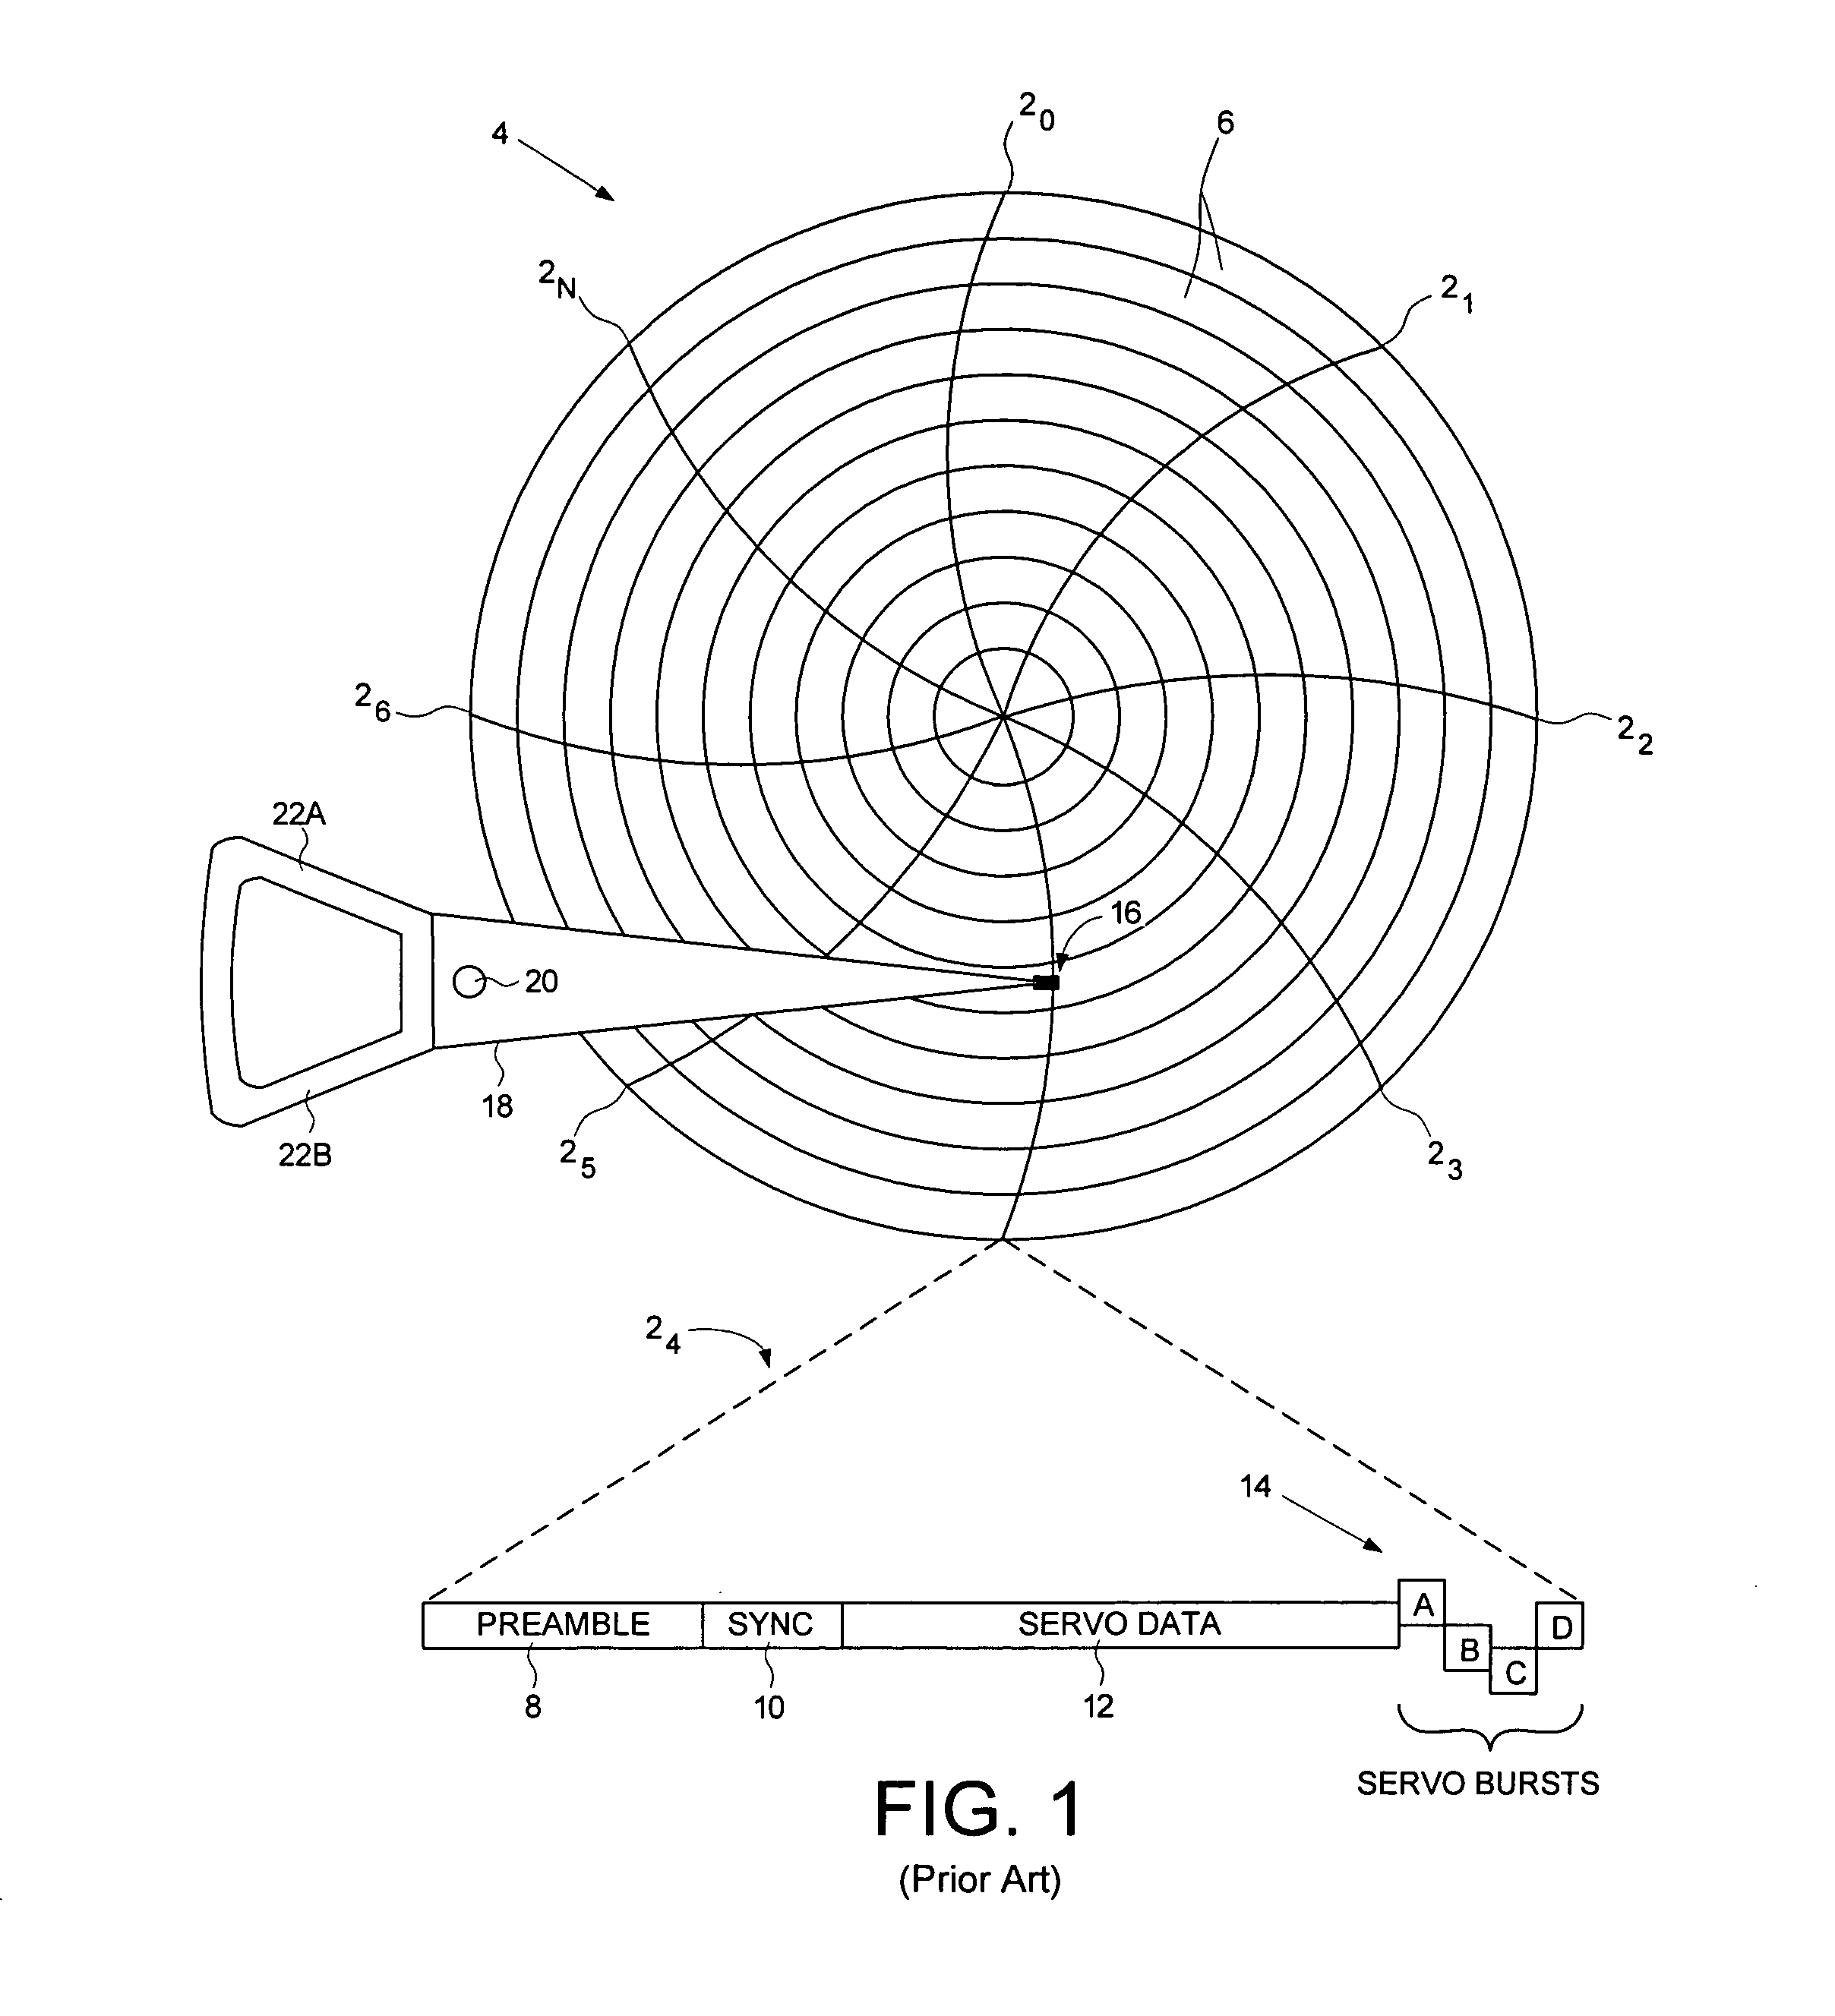 Demagnetizing a head in a disk drive by increasing the frequency of an AC write signal while maintaining the write current amplitude